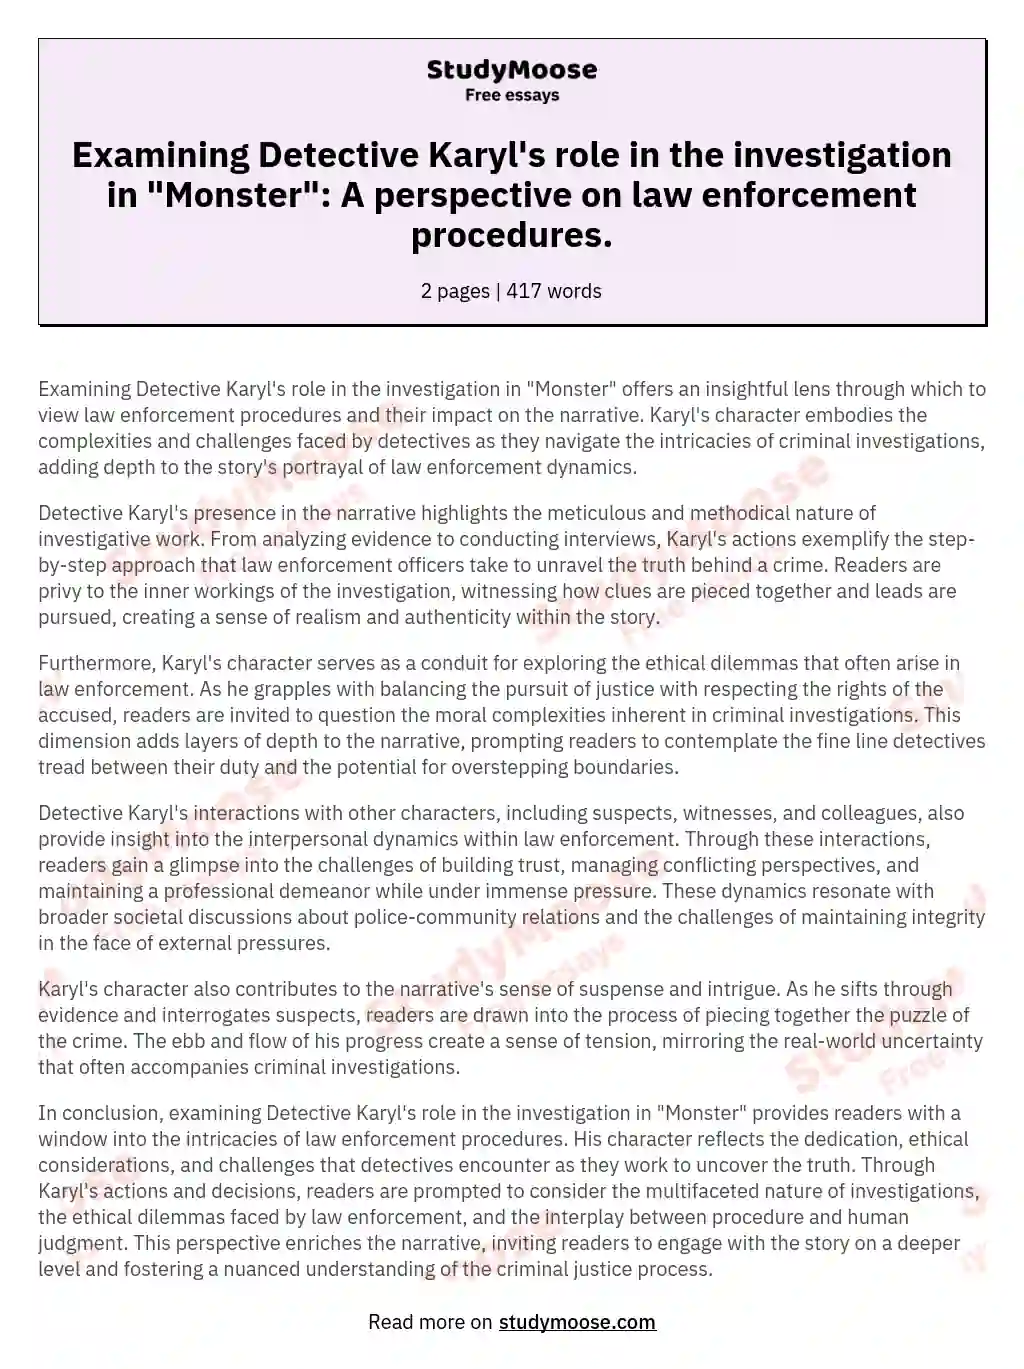 Examining Detective Karyl's role in the investigation in "Monster": A perspective on law enforcement procedures. essay